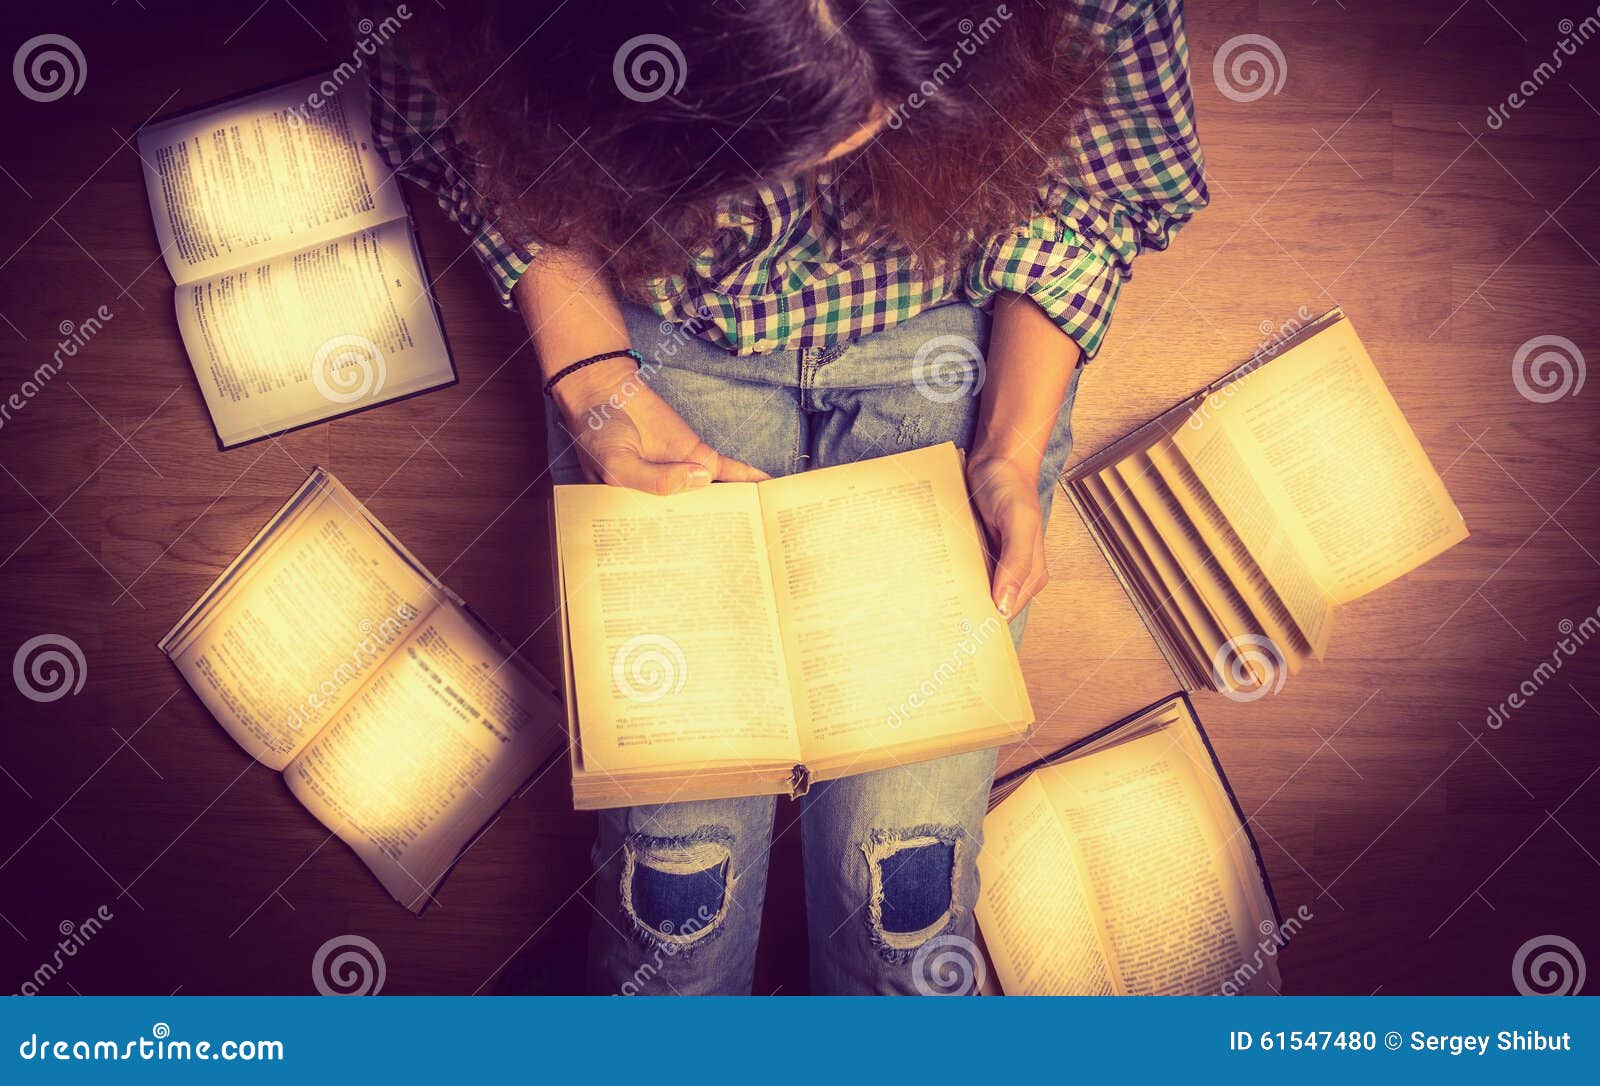 girl in a shirt holding a book sitting on the floor around her spread open books close up retro toning